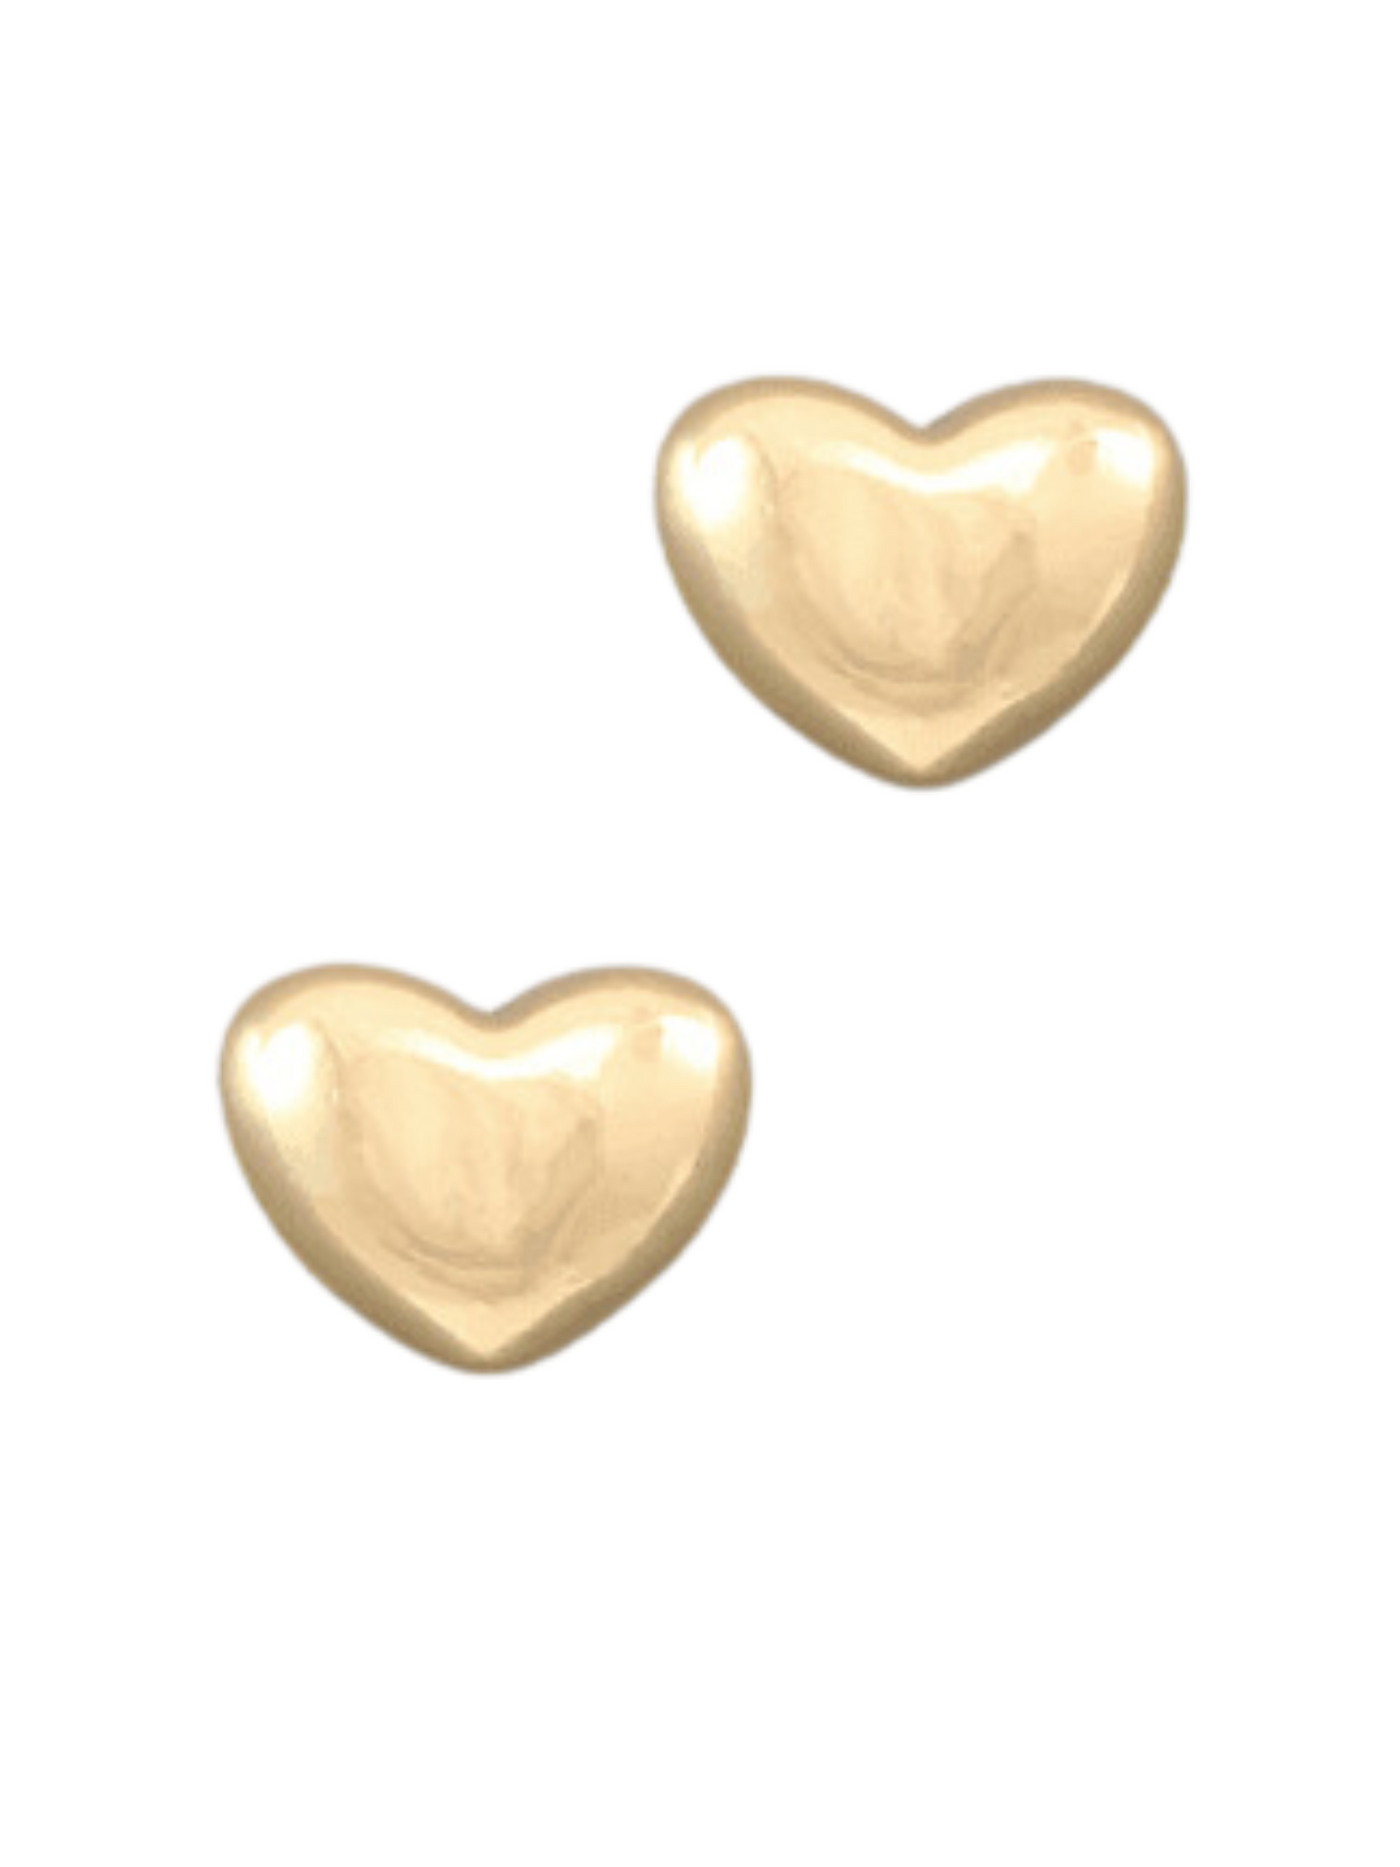 Heart Dome Studs in gold.